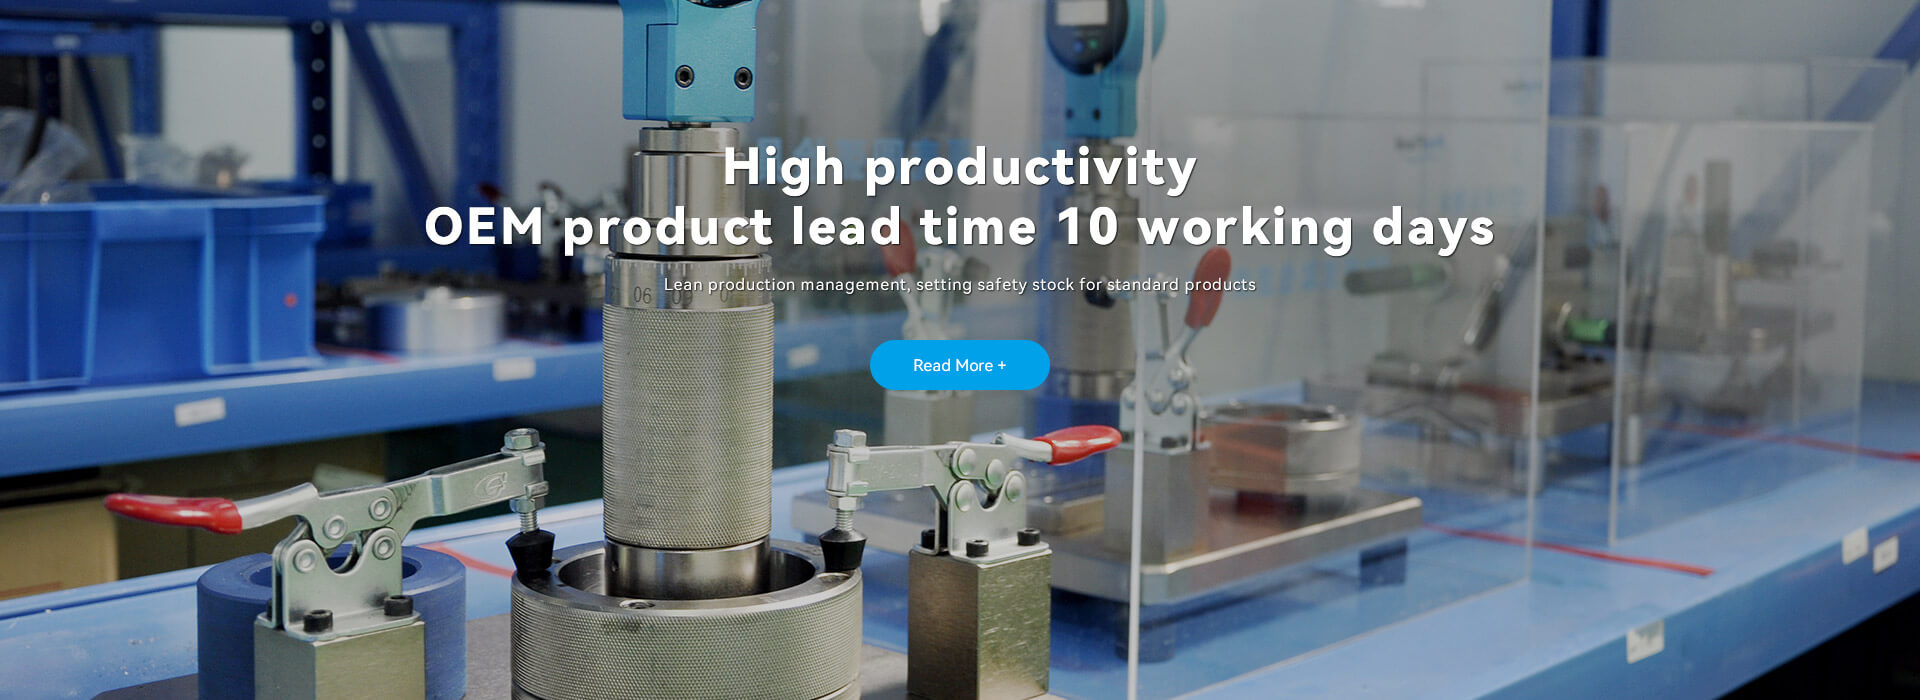 High productivity OEM product lead time 10 working days